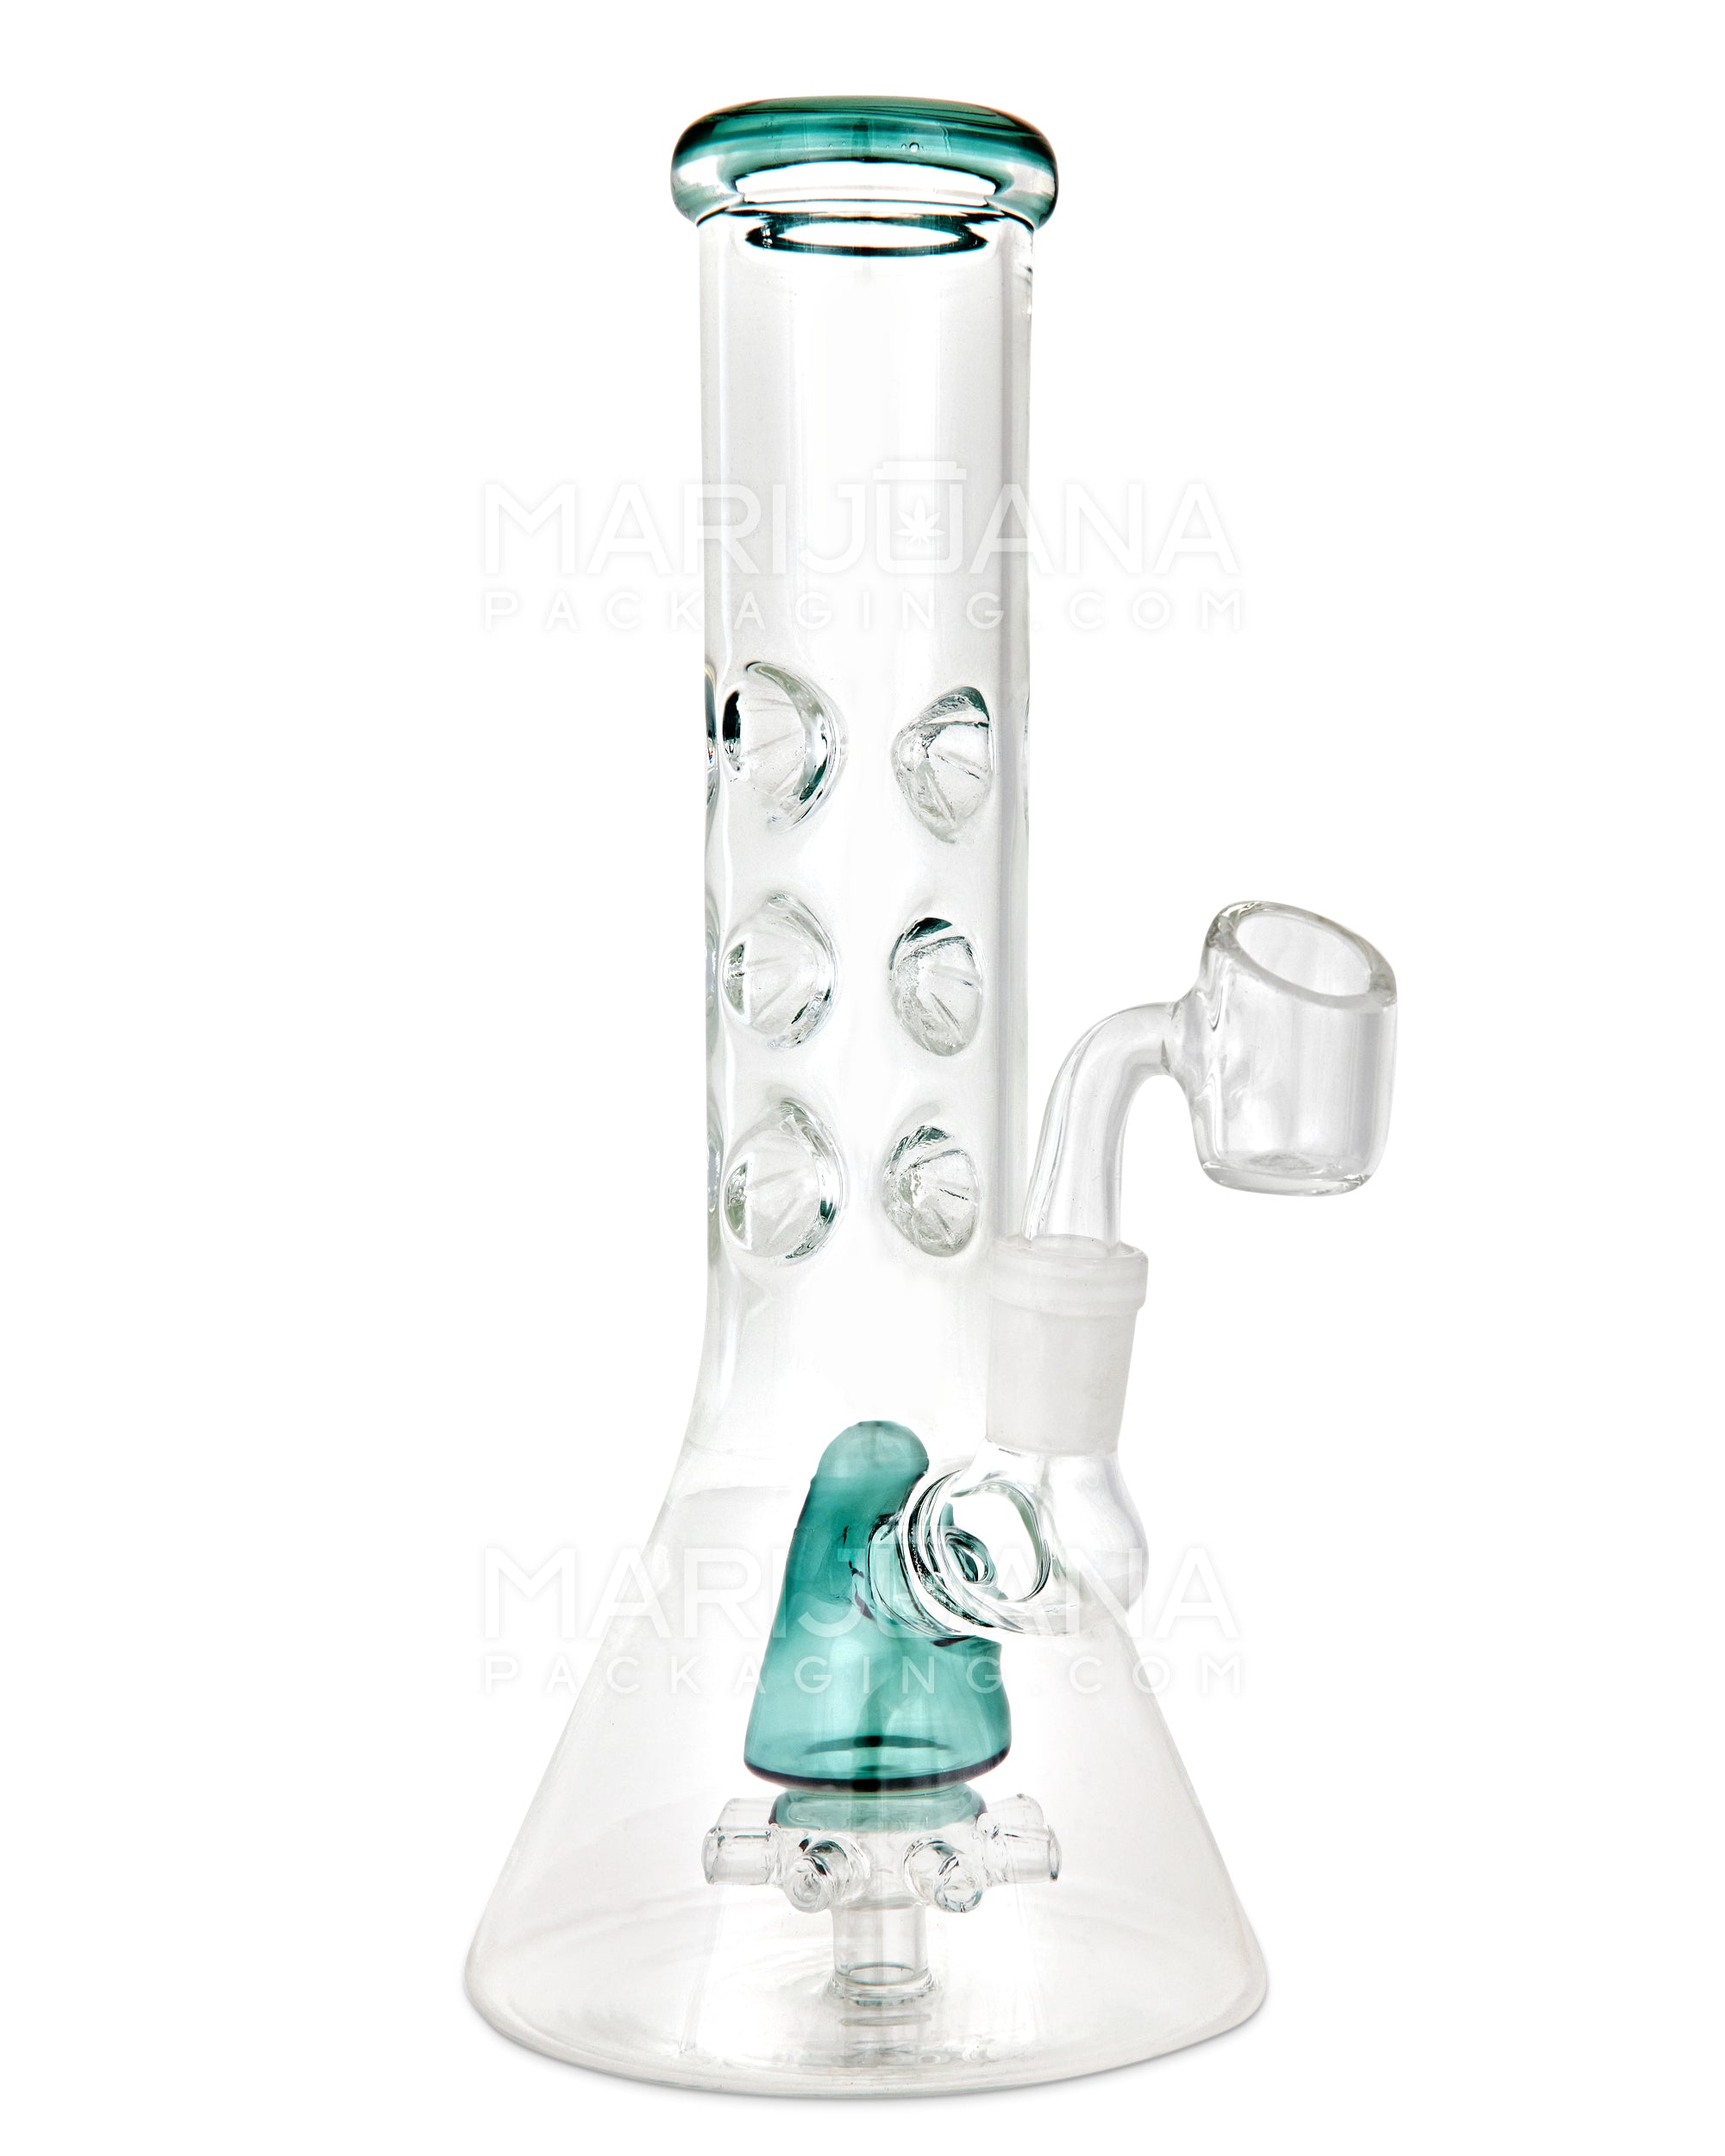 Straight Neck Atomic Perc Glass Beaker Water Pipe w/ Ice Catcher | 10in Tall - 14mm Bowl - Teal - 5